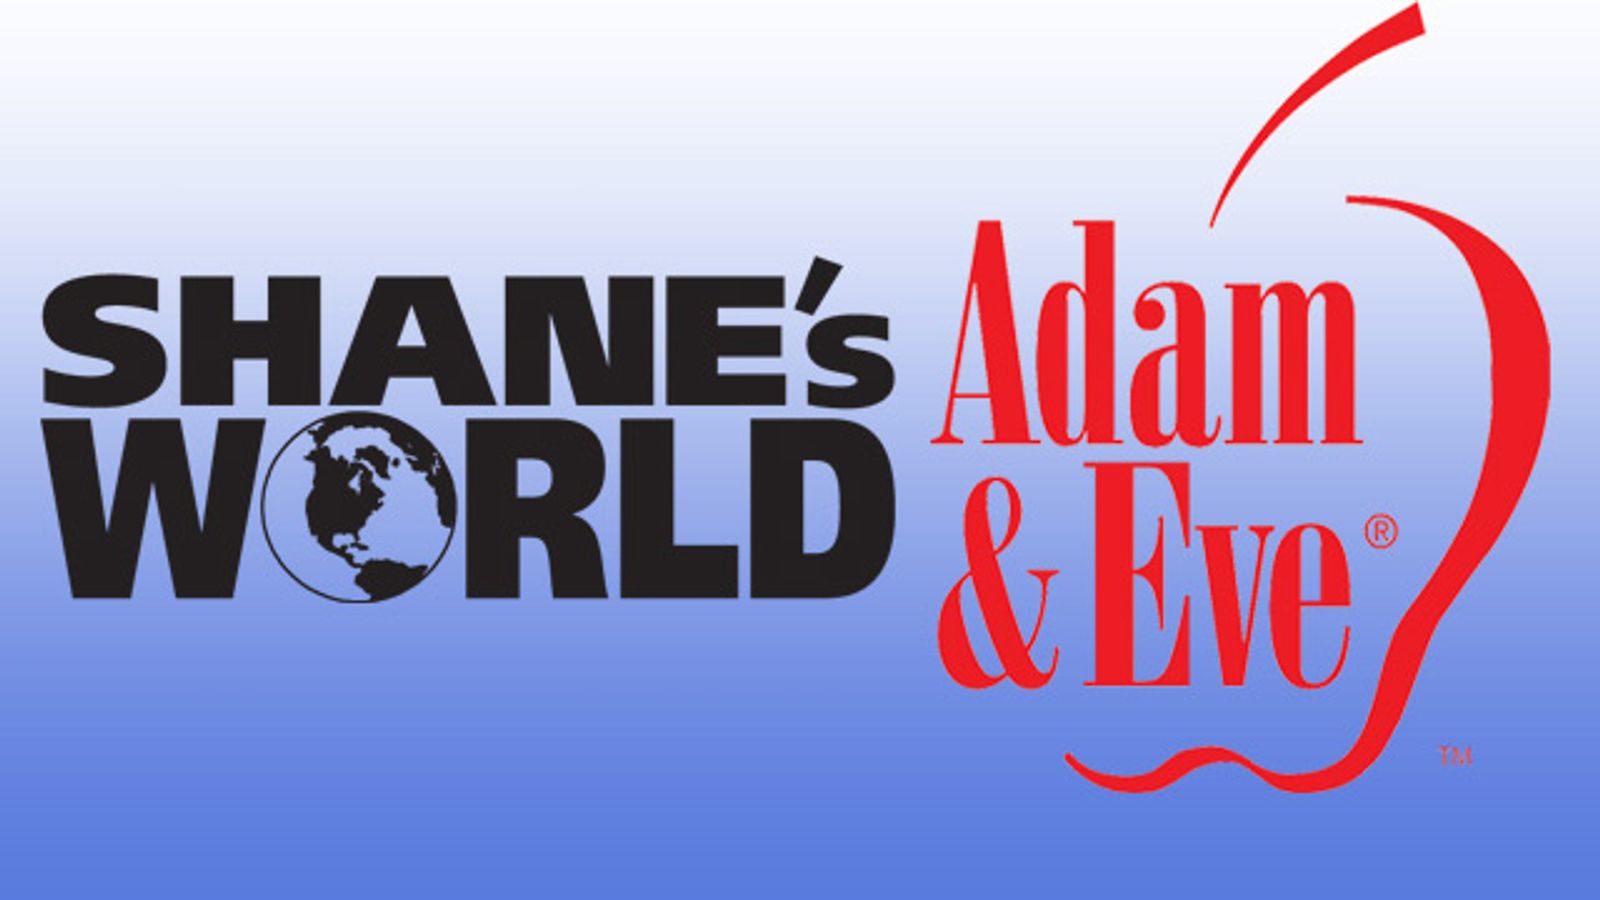 Shane's World Partners With Adam & Eve for Distro